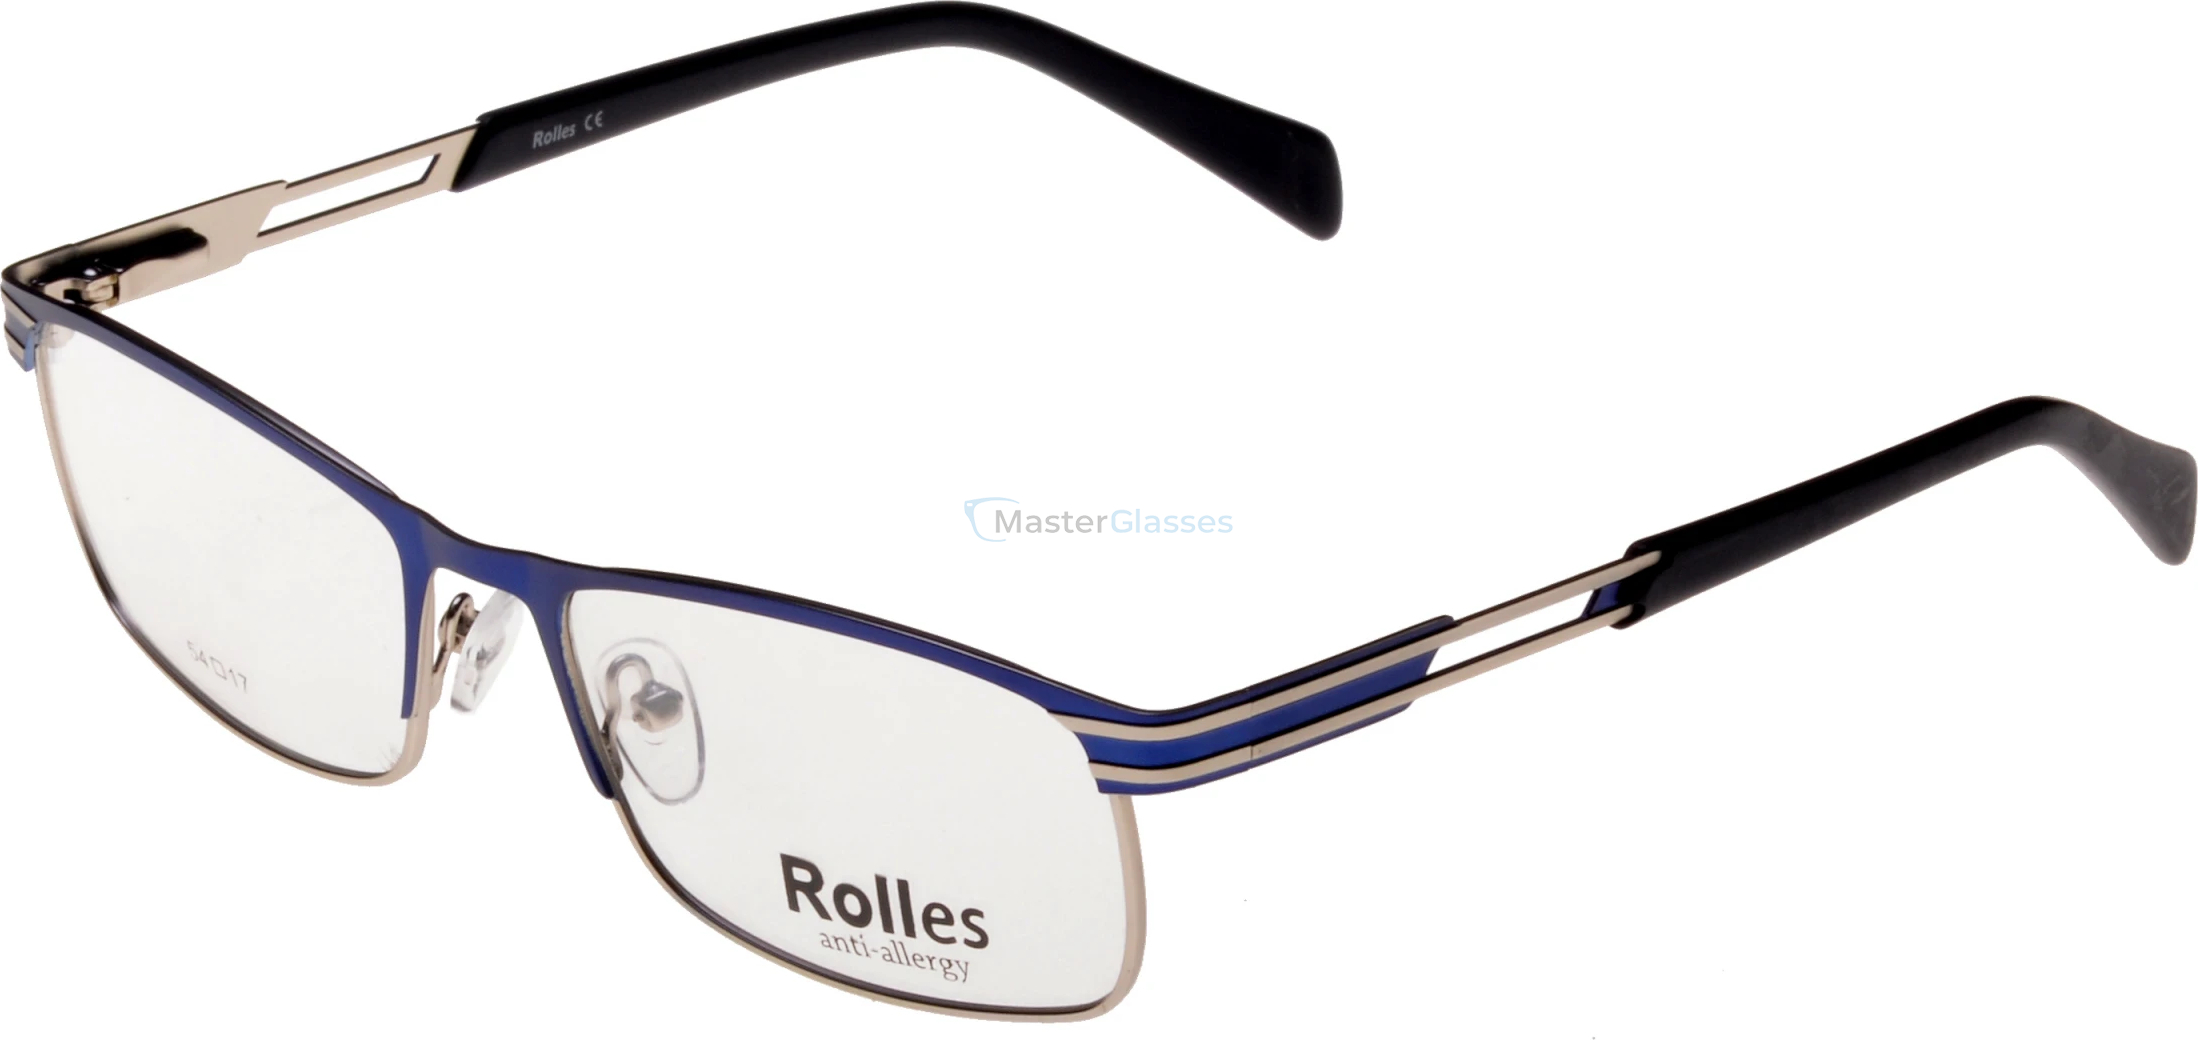  Rolles 460 02